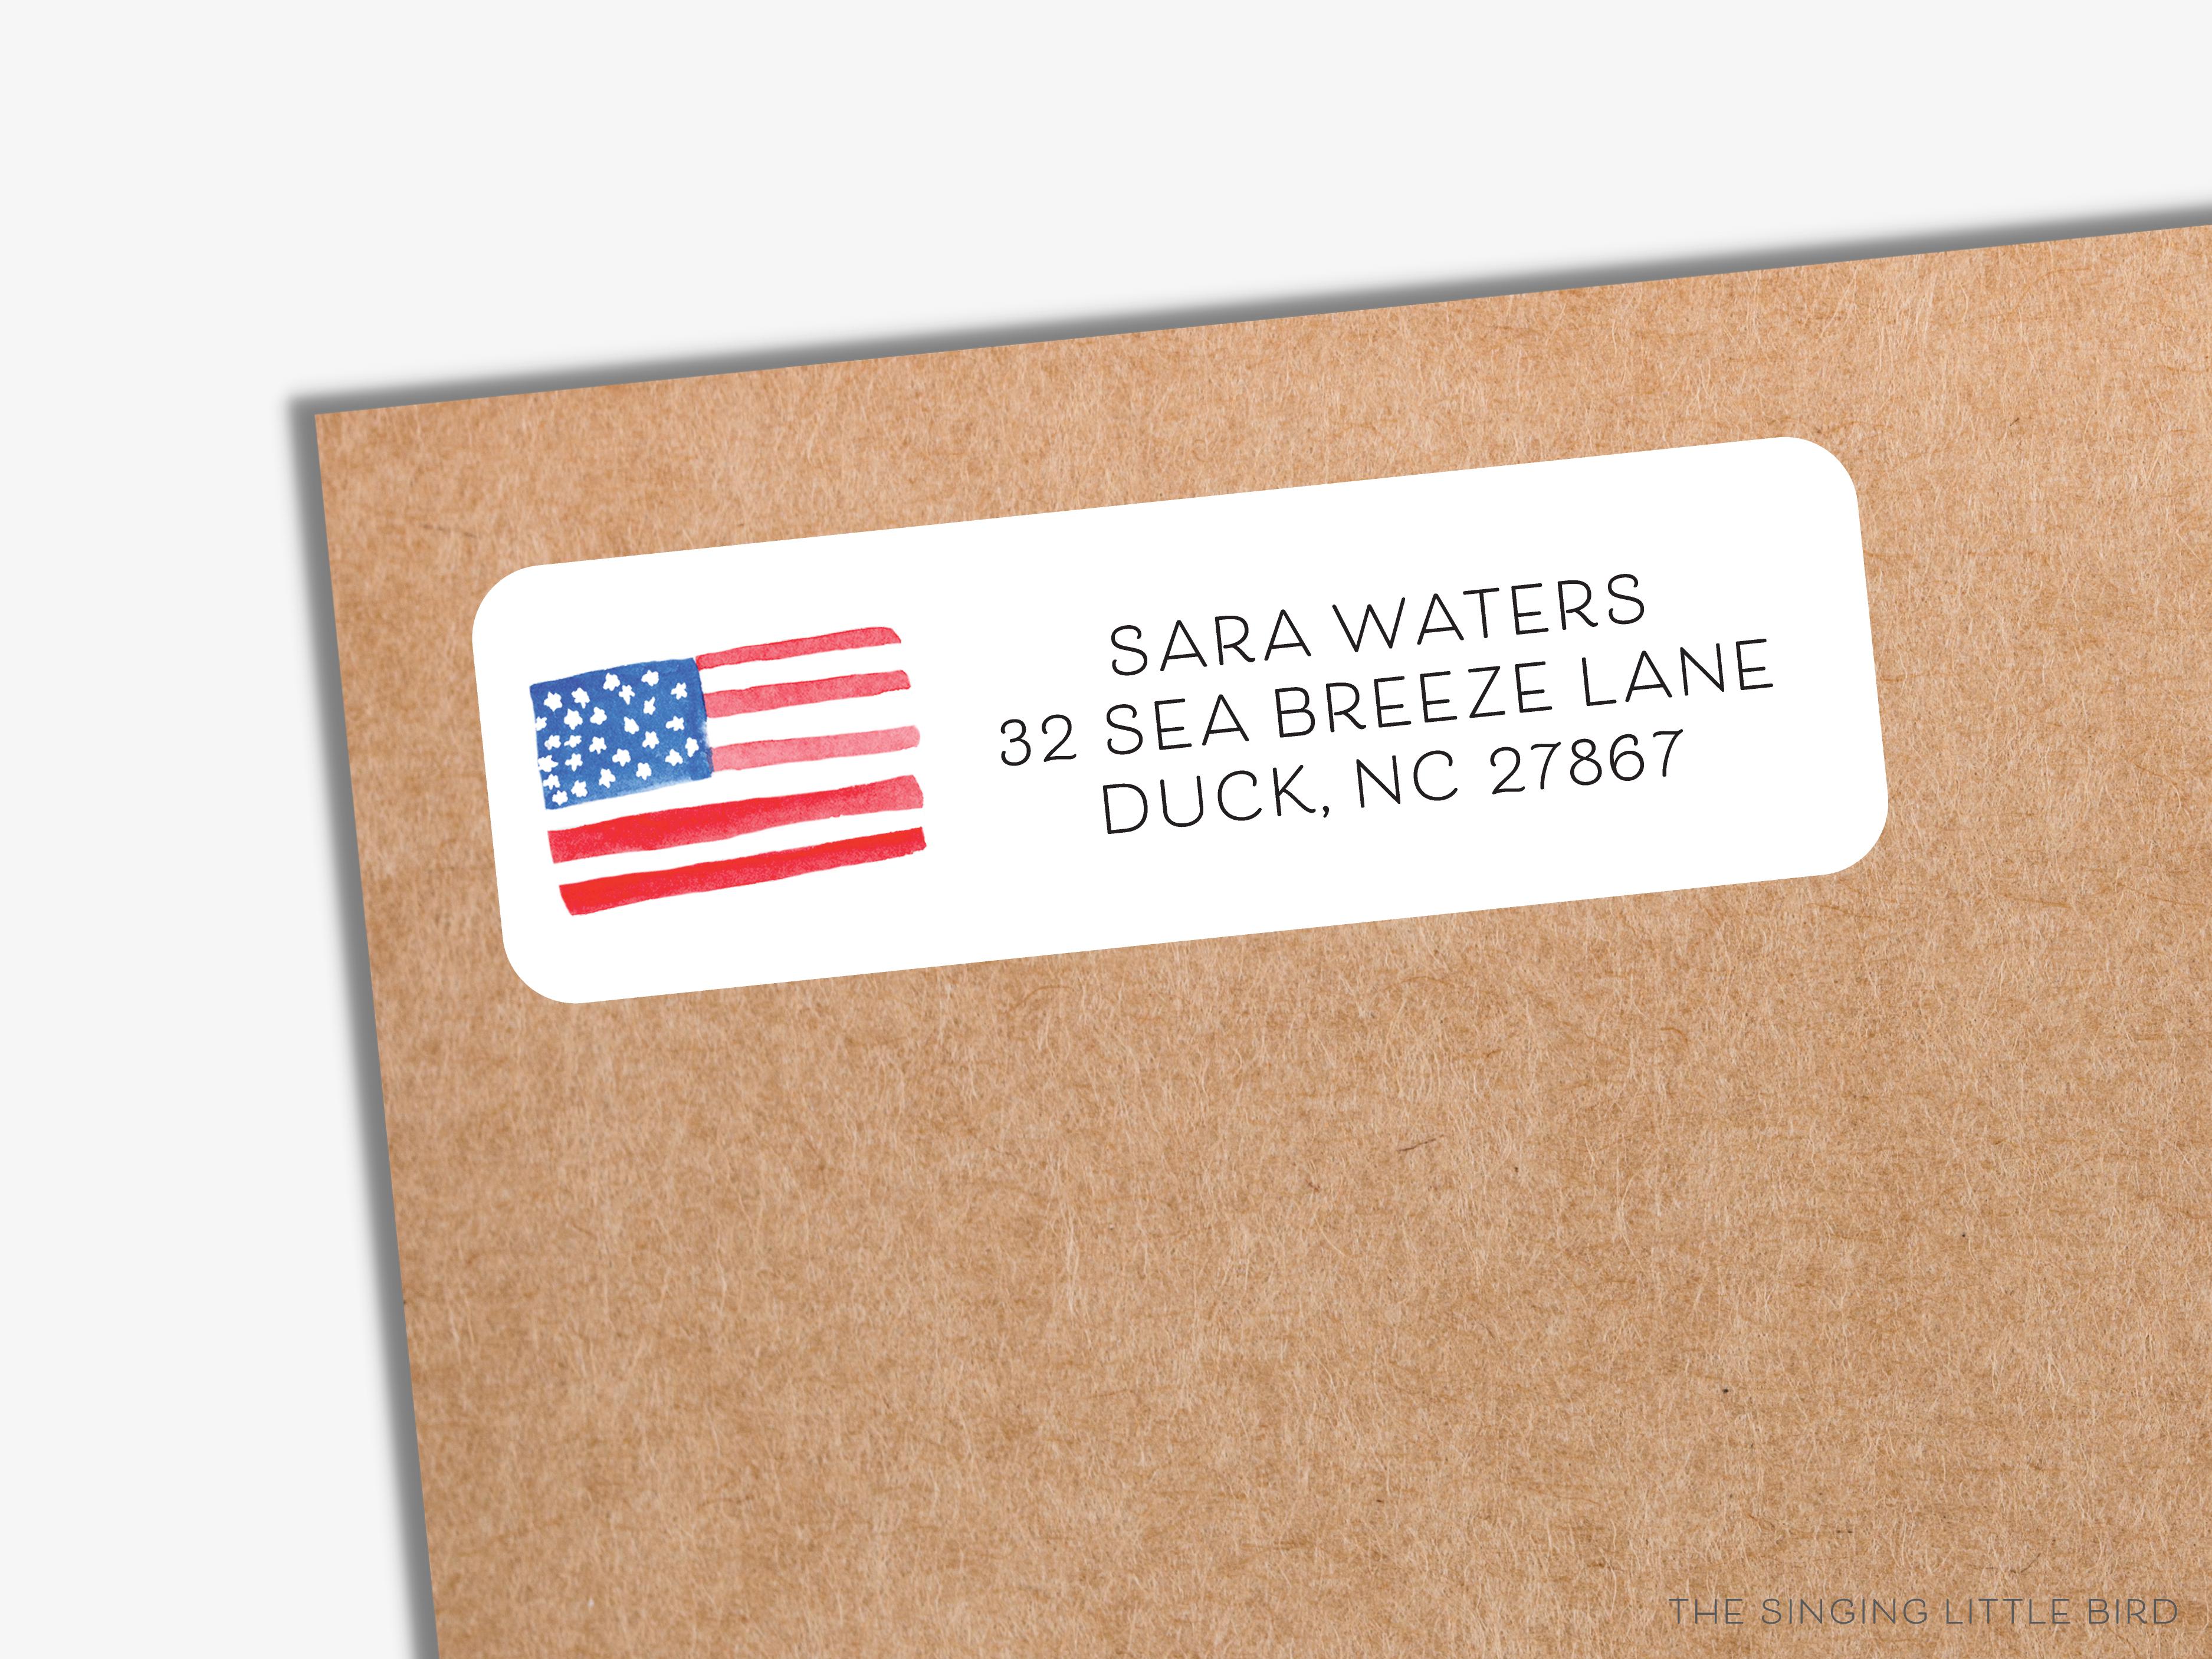 American Flag Return Address Labels- These personalized return address labels are 2.625" x 1" and feature our hand-painted watercolor American flag, printed in the USA on beautiful matte finish labels. These make great gifts for yourself or the patriotic lover. -The Singing Little Bird